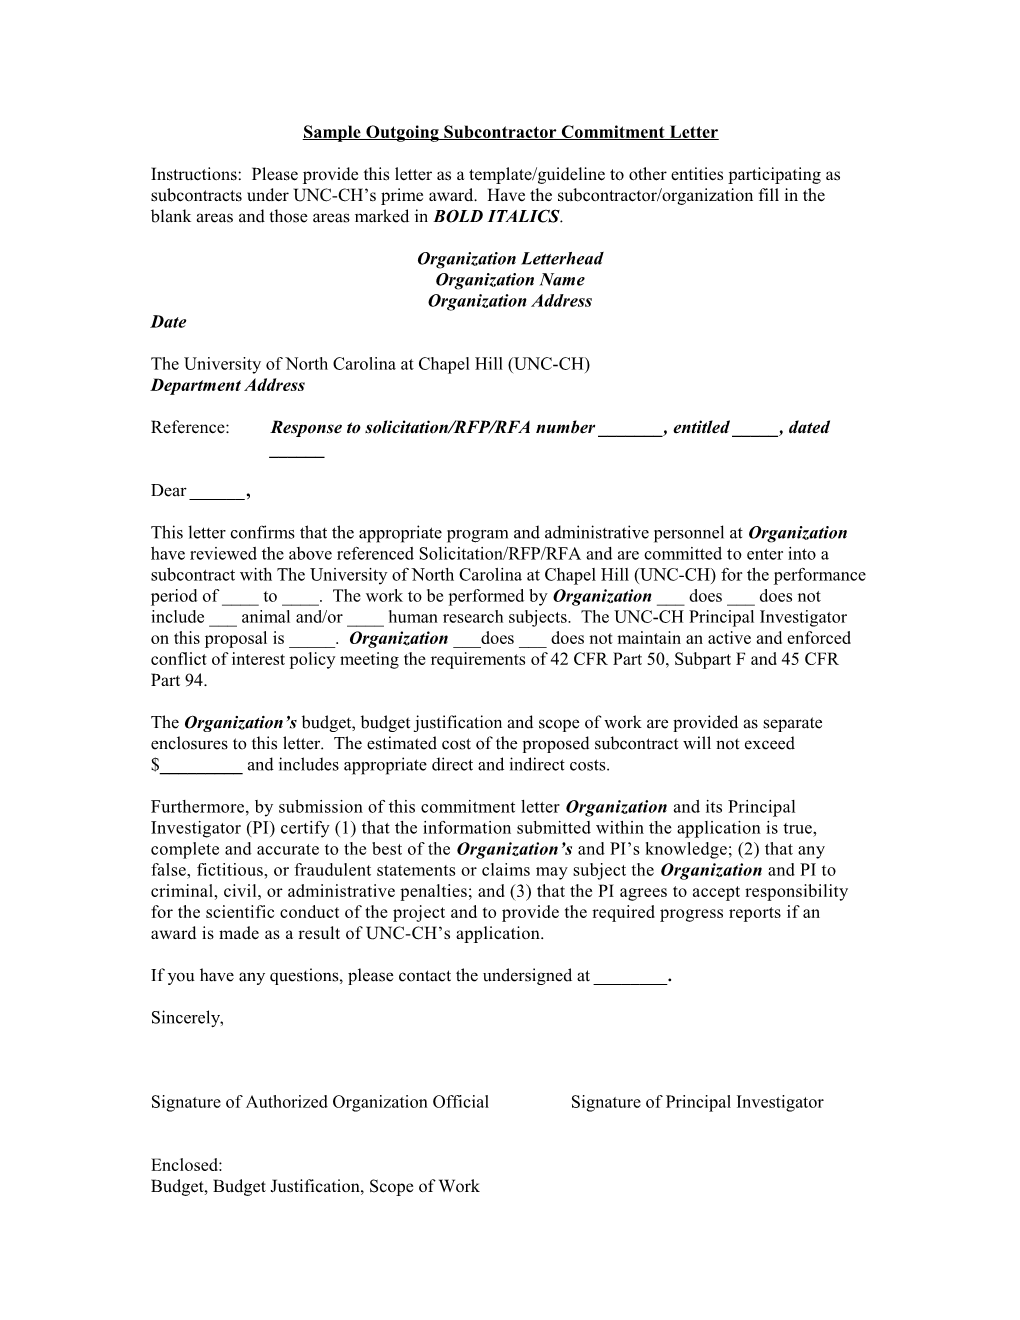 Sample Incoming Subcontractor Commitment Letter